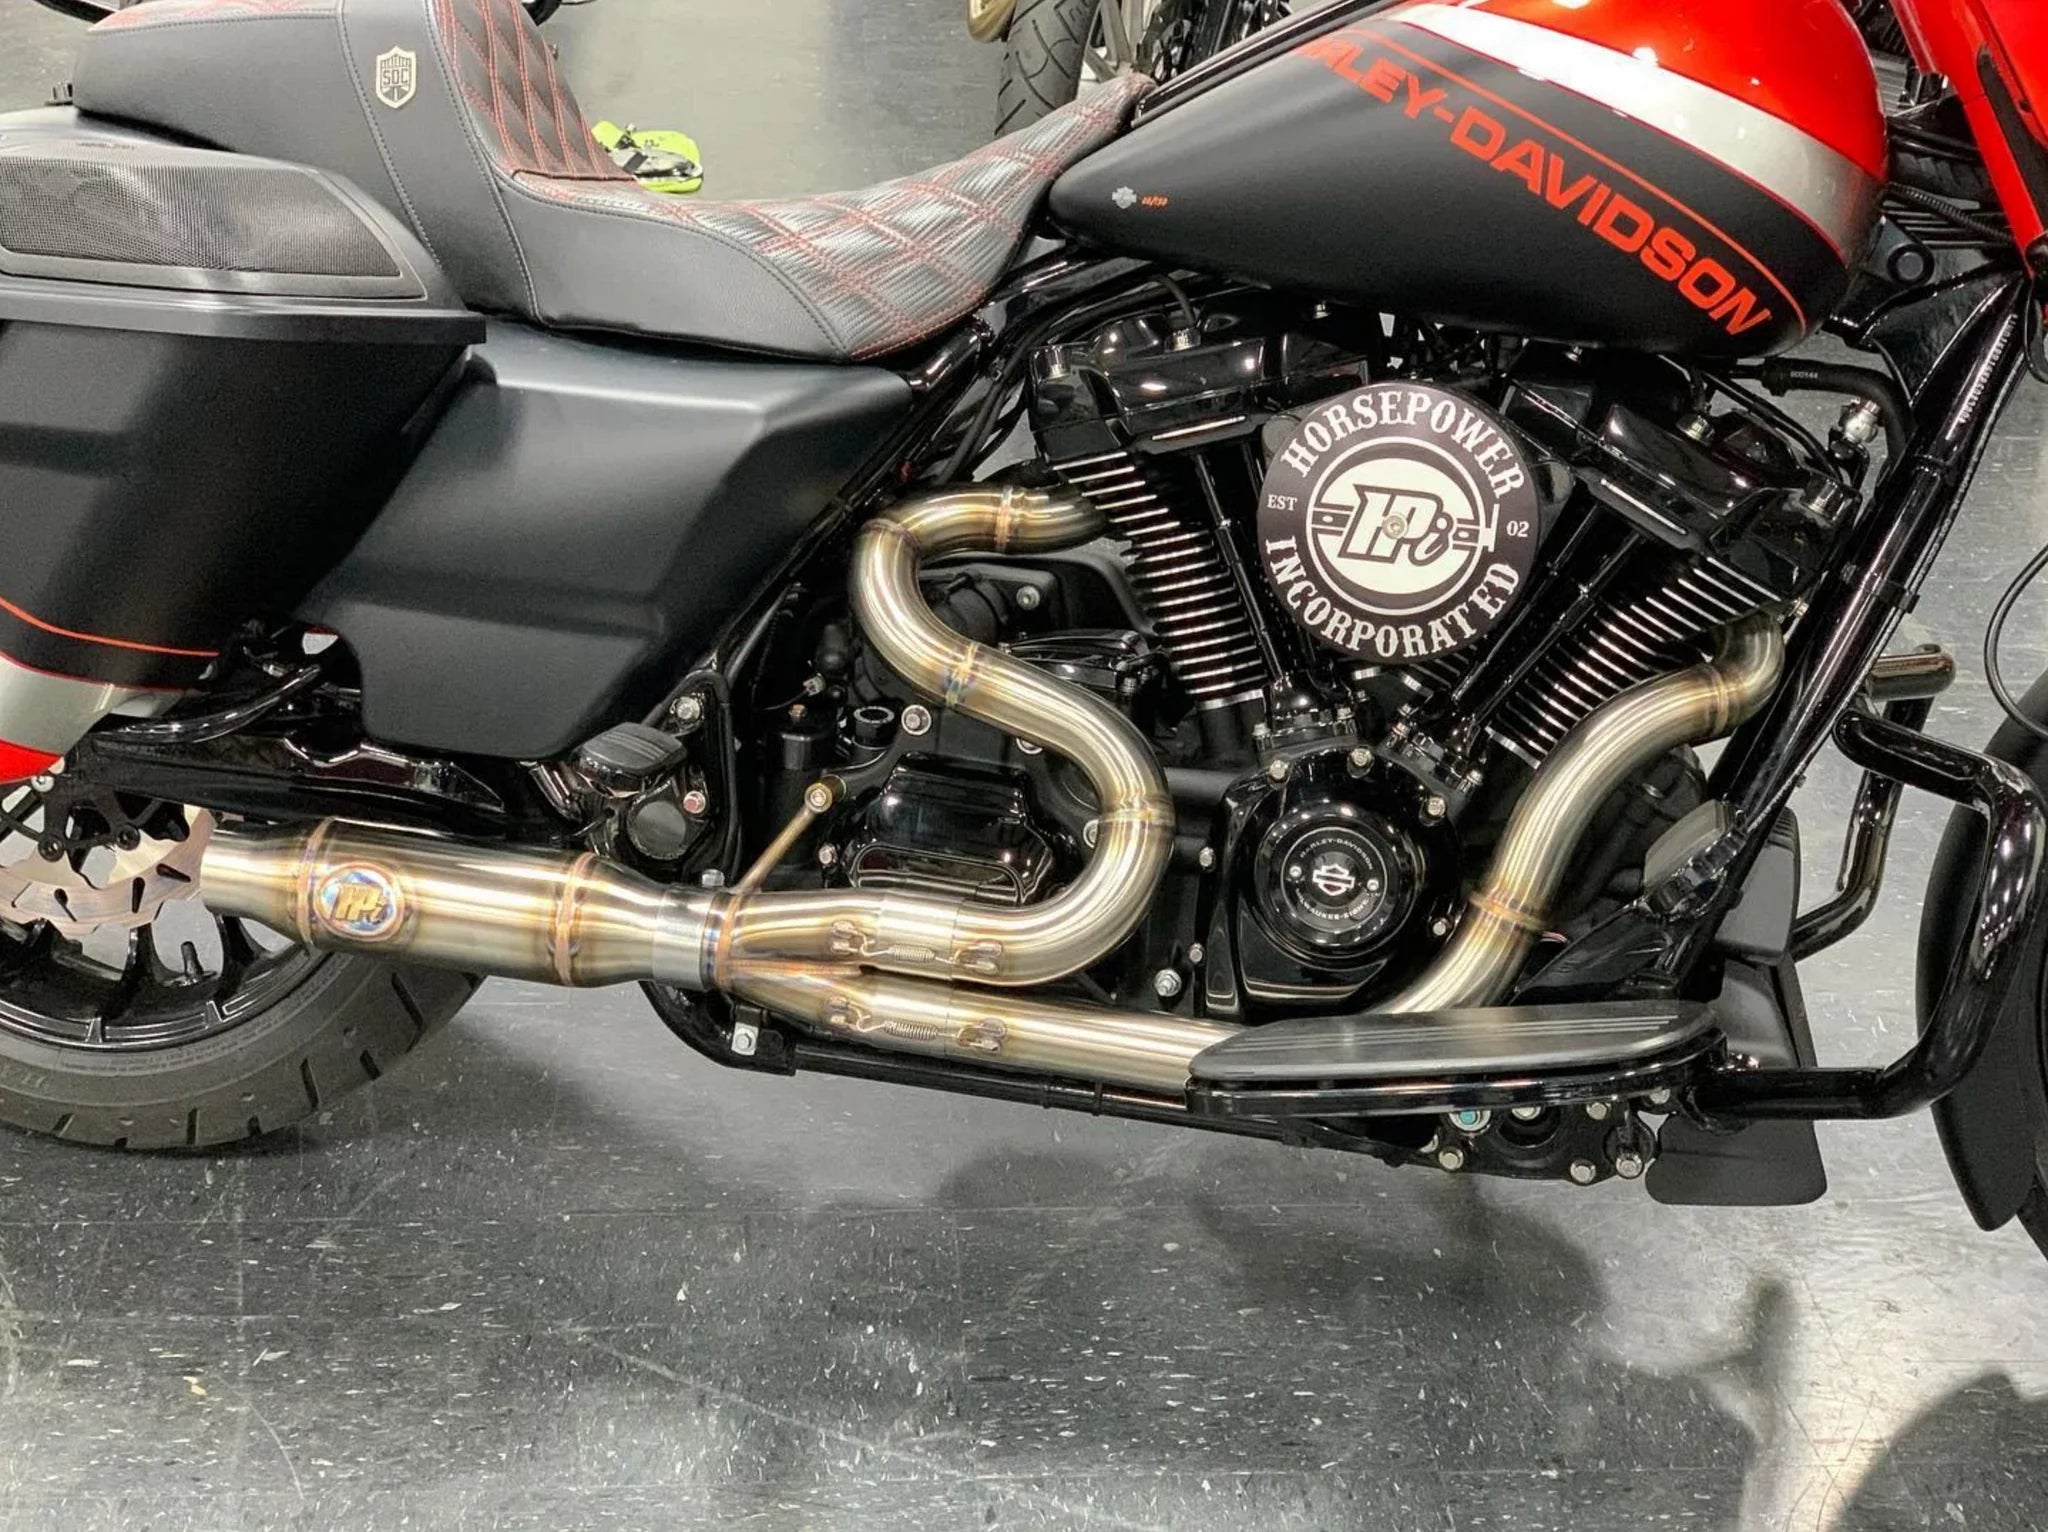 HPi Stainless Exhaust for M8 Bagger